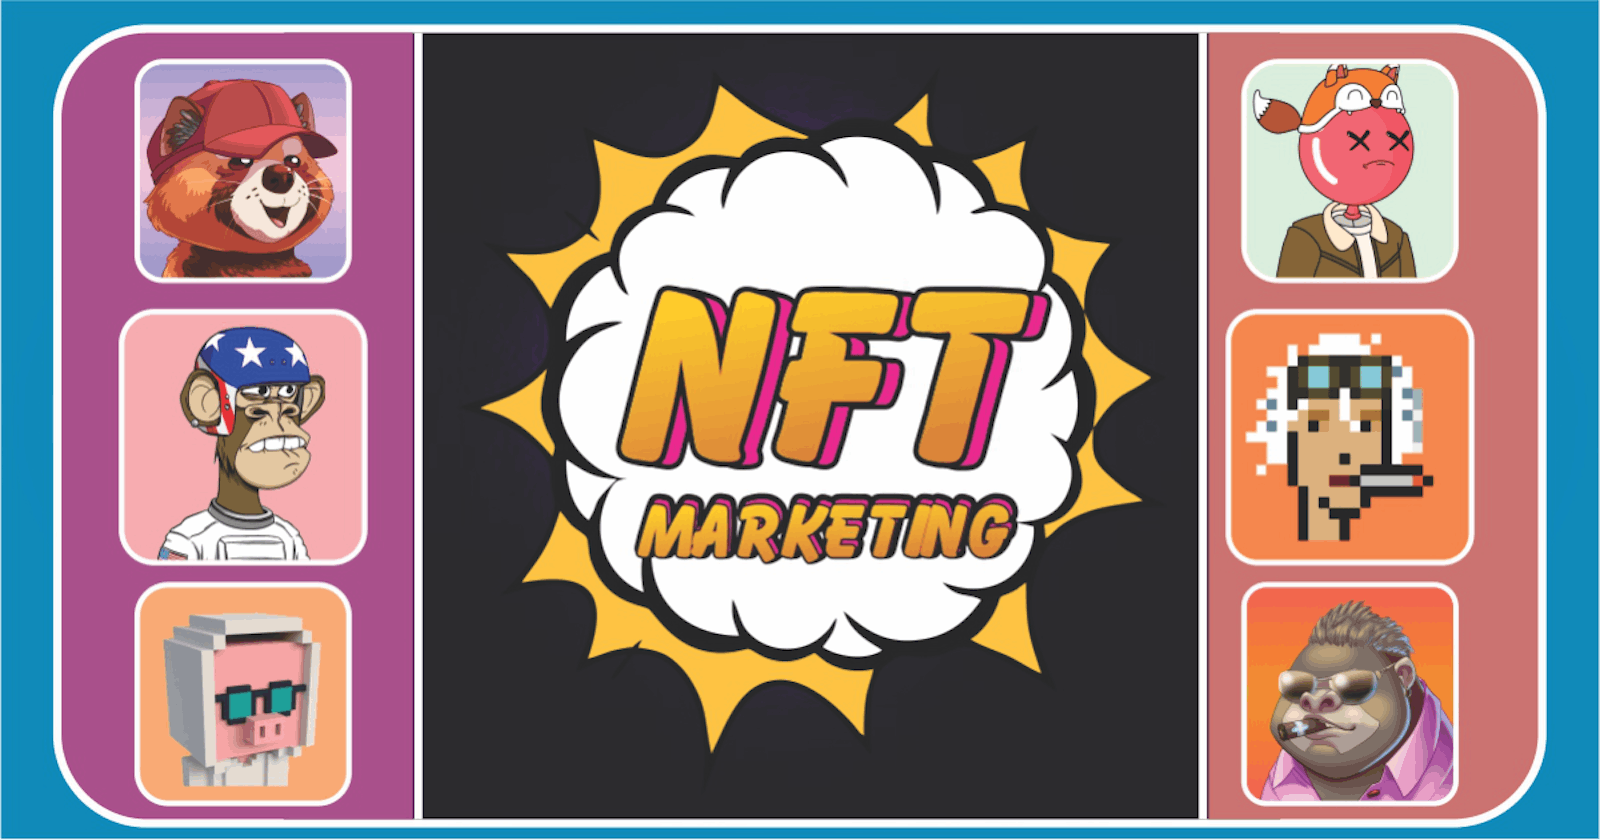 How to use effective marketing to turn your NFT collection into blue-chip